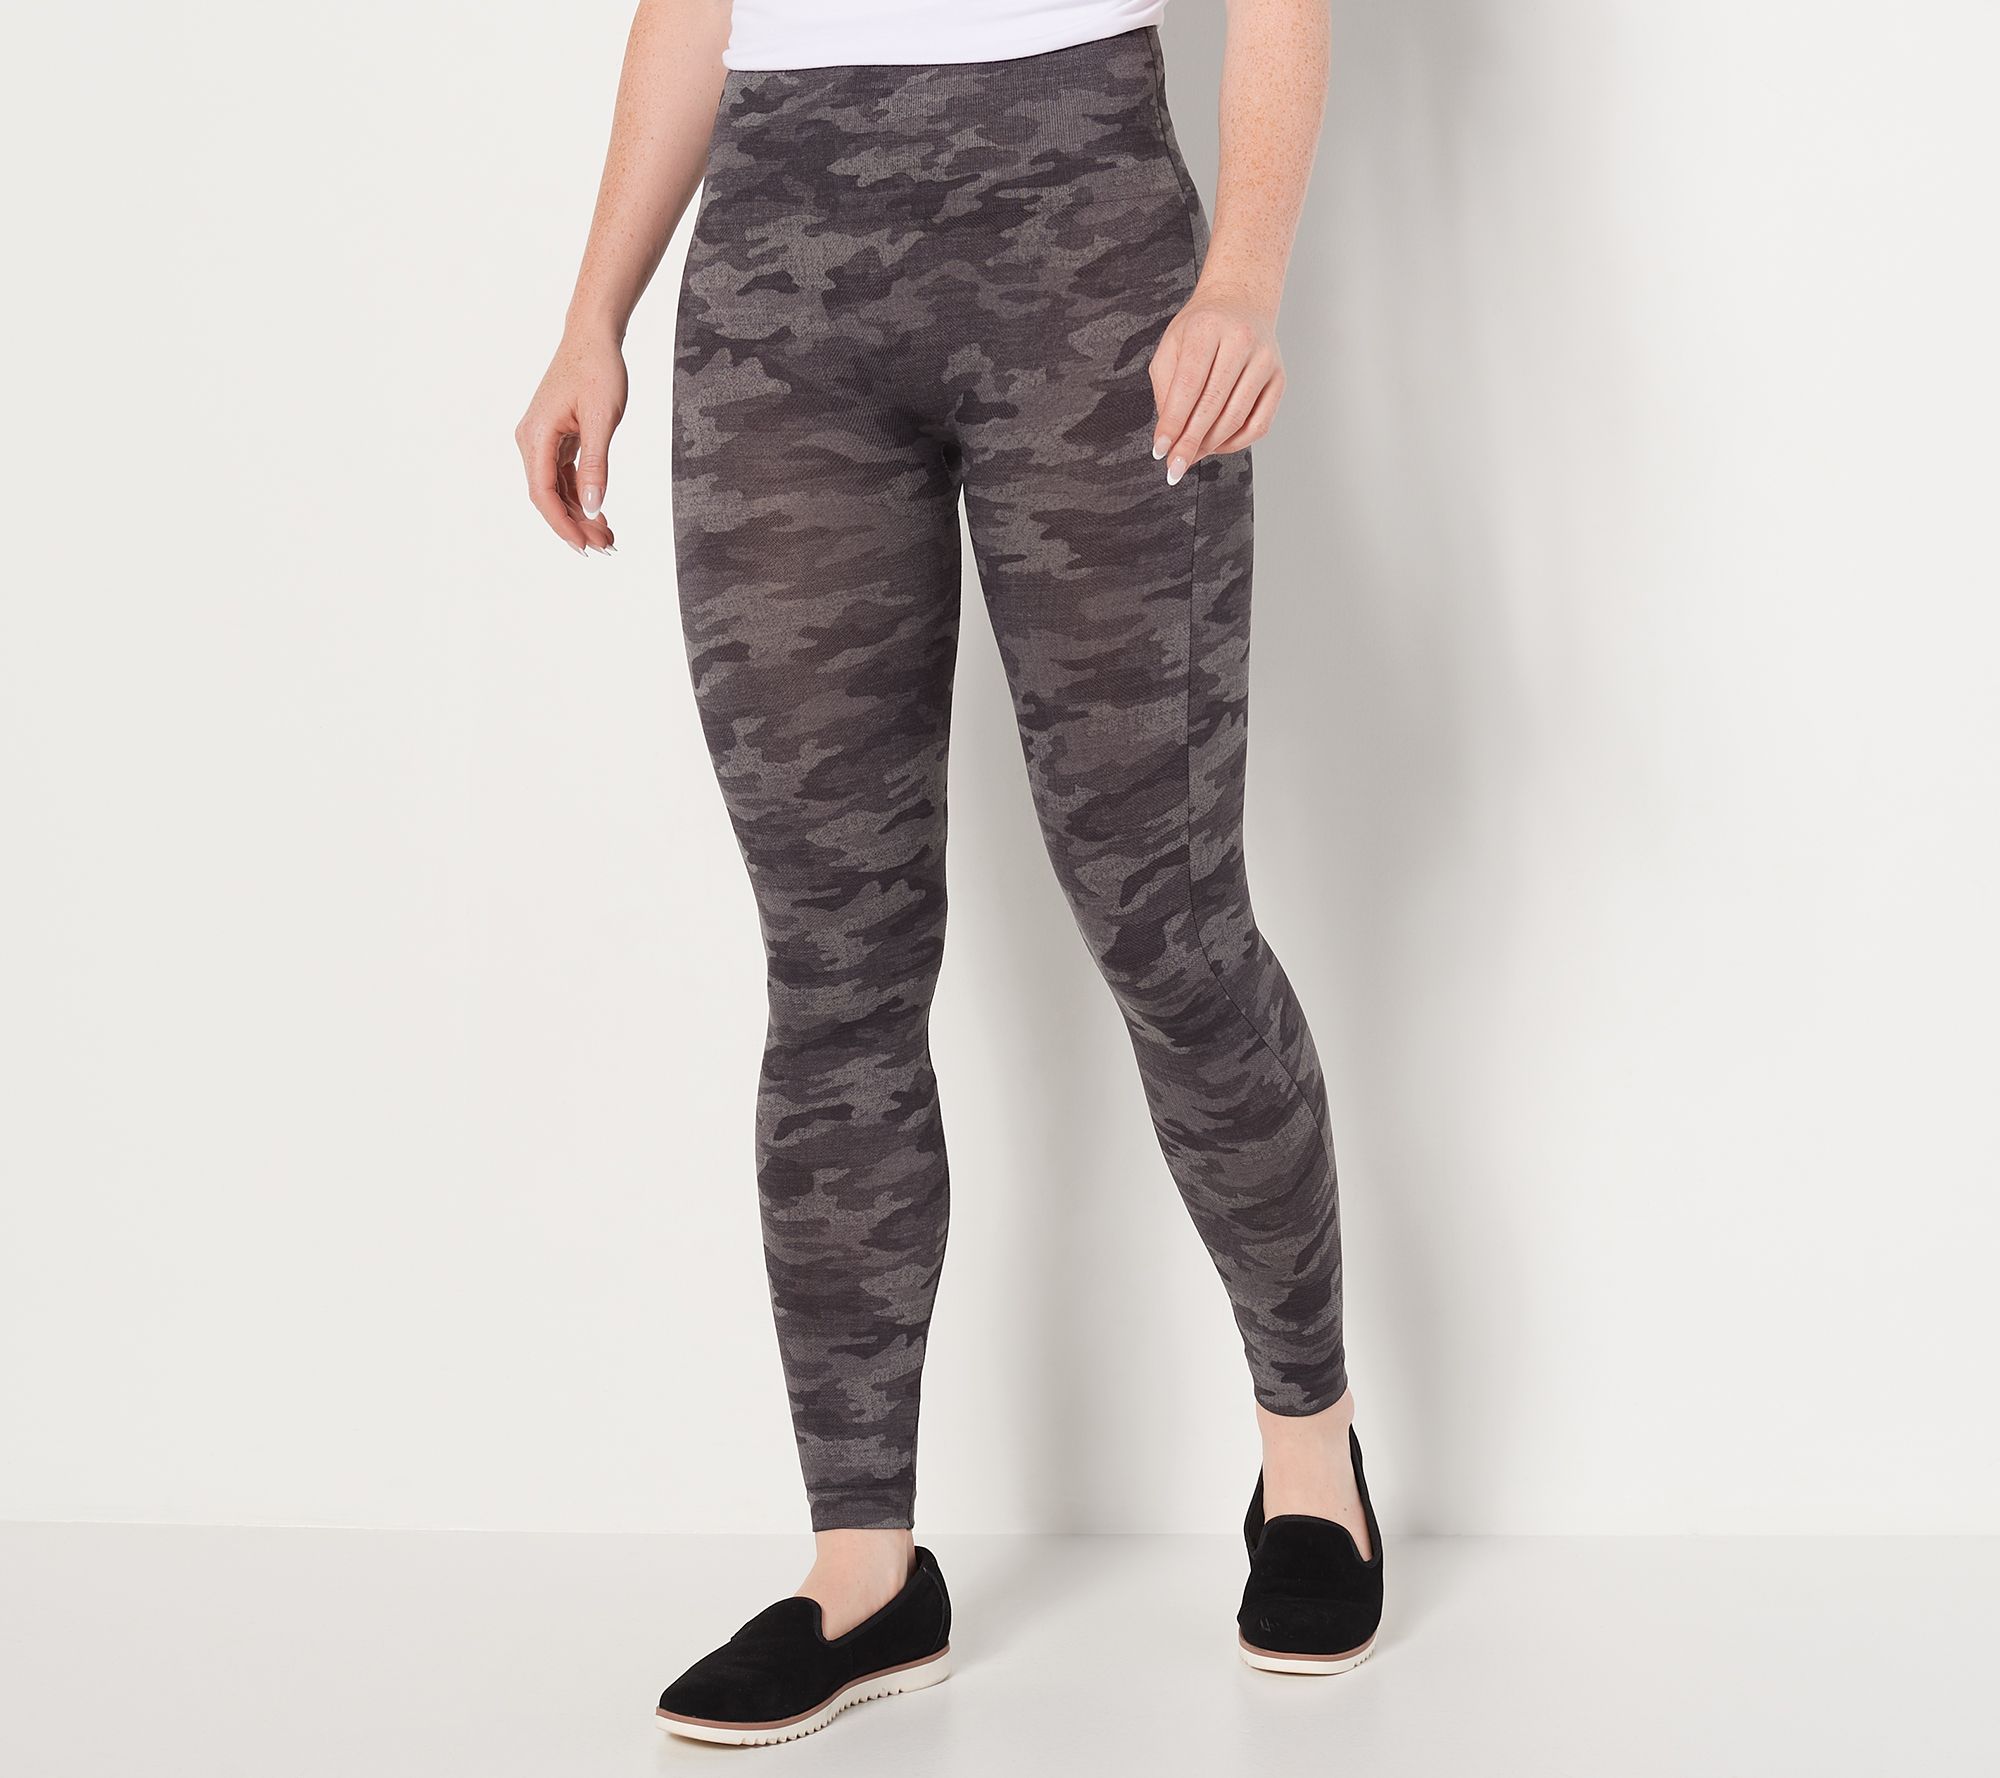 Spanx Look At Me Now High Waisted Seamless Camo Leggings Size 1X - $28 -  From Edith